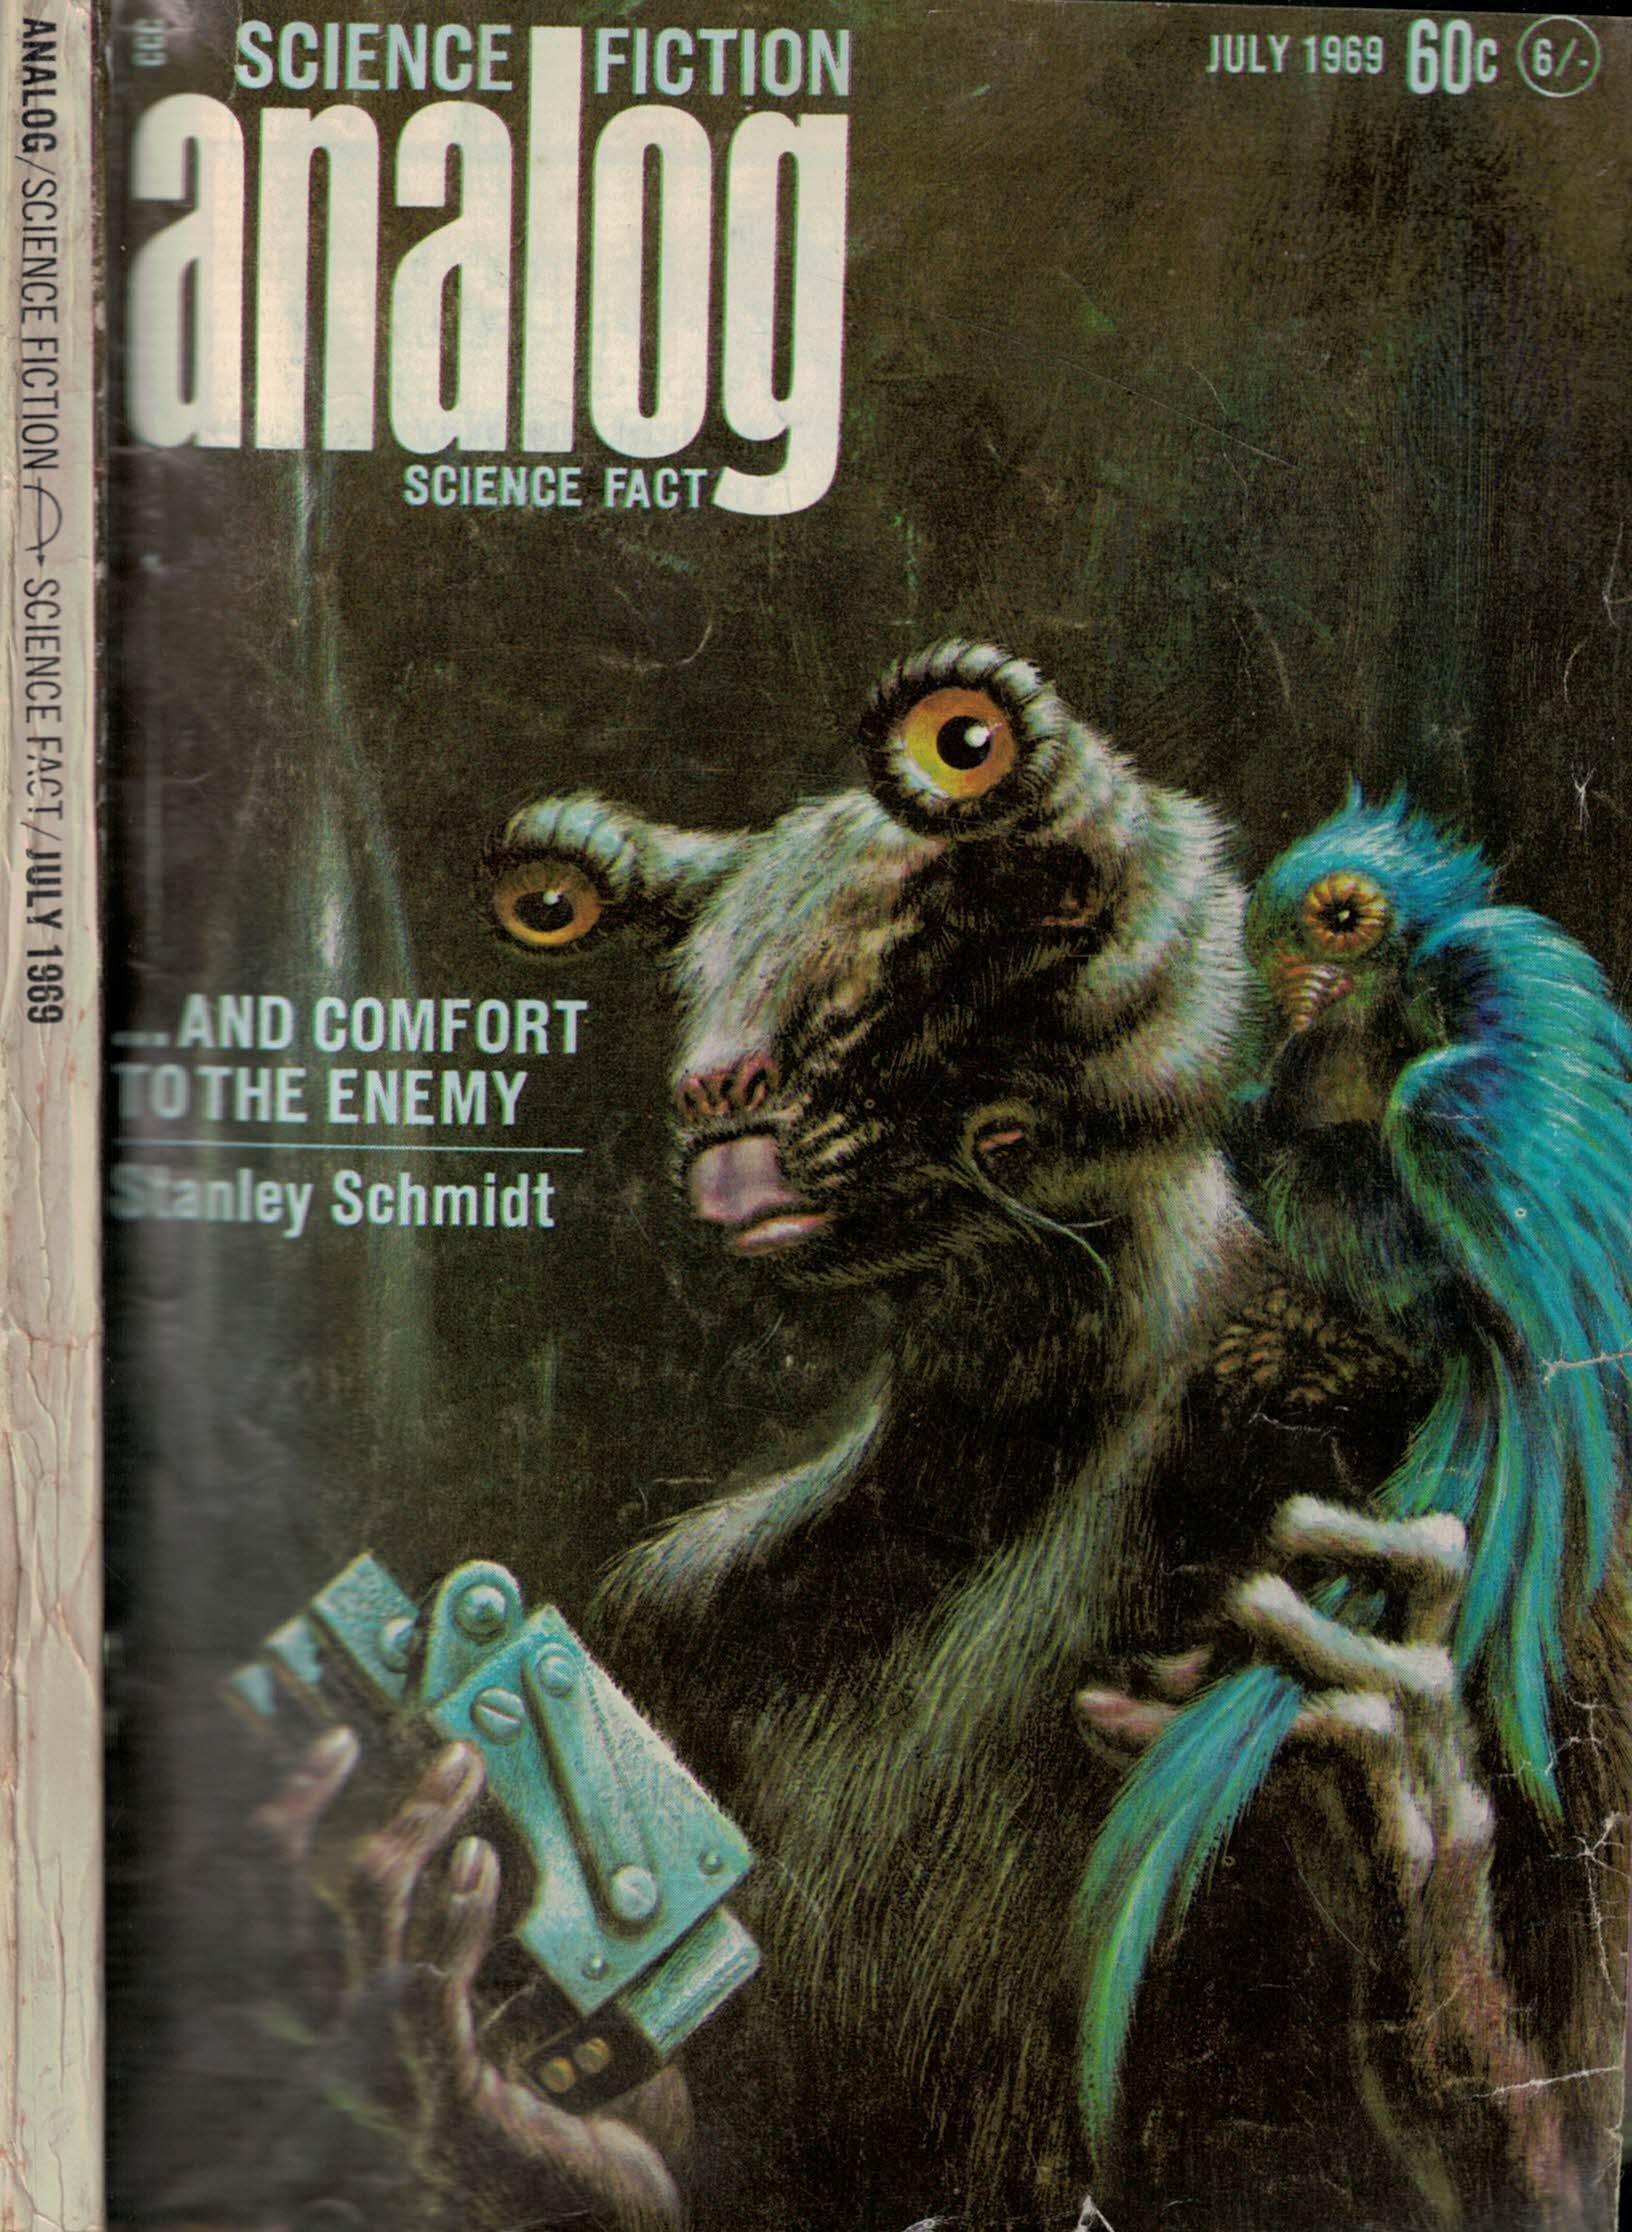 Analog. Science Fiction and Fact. Volume 83, Number 5. July 1969.